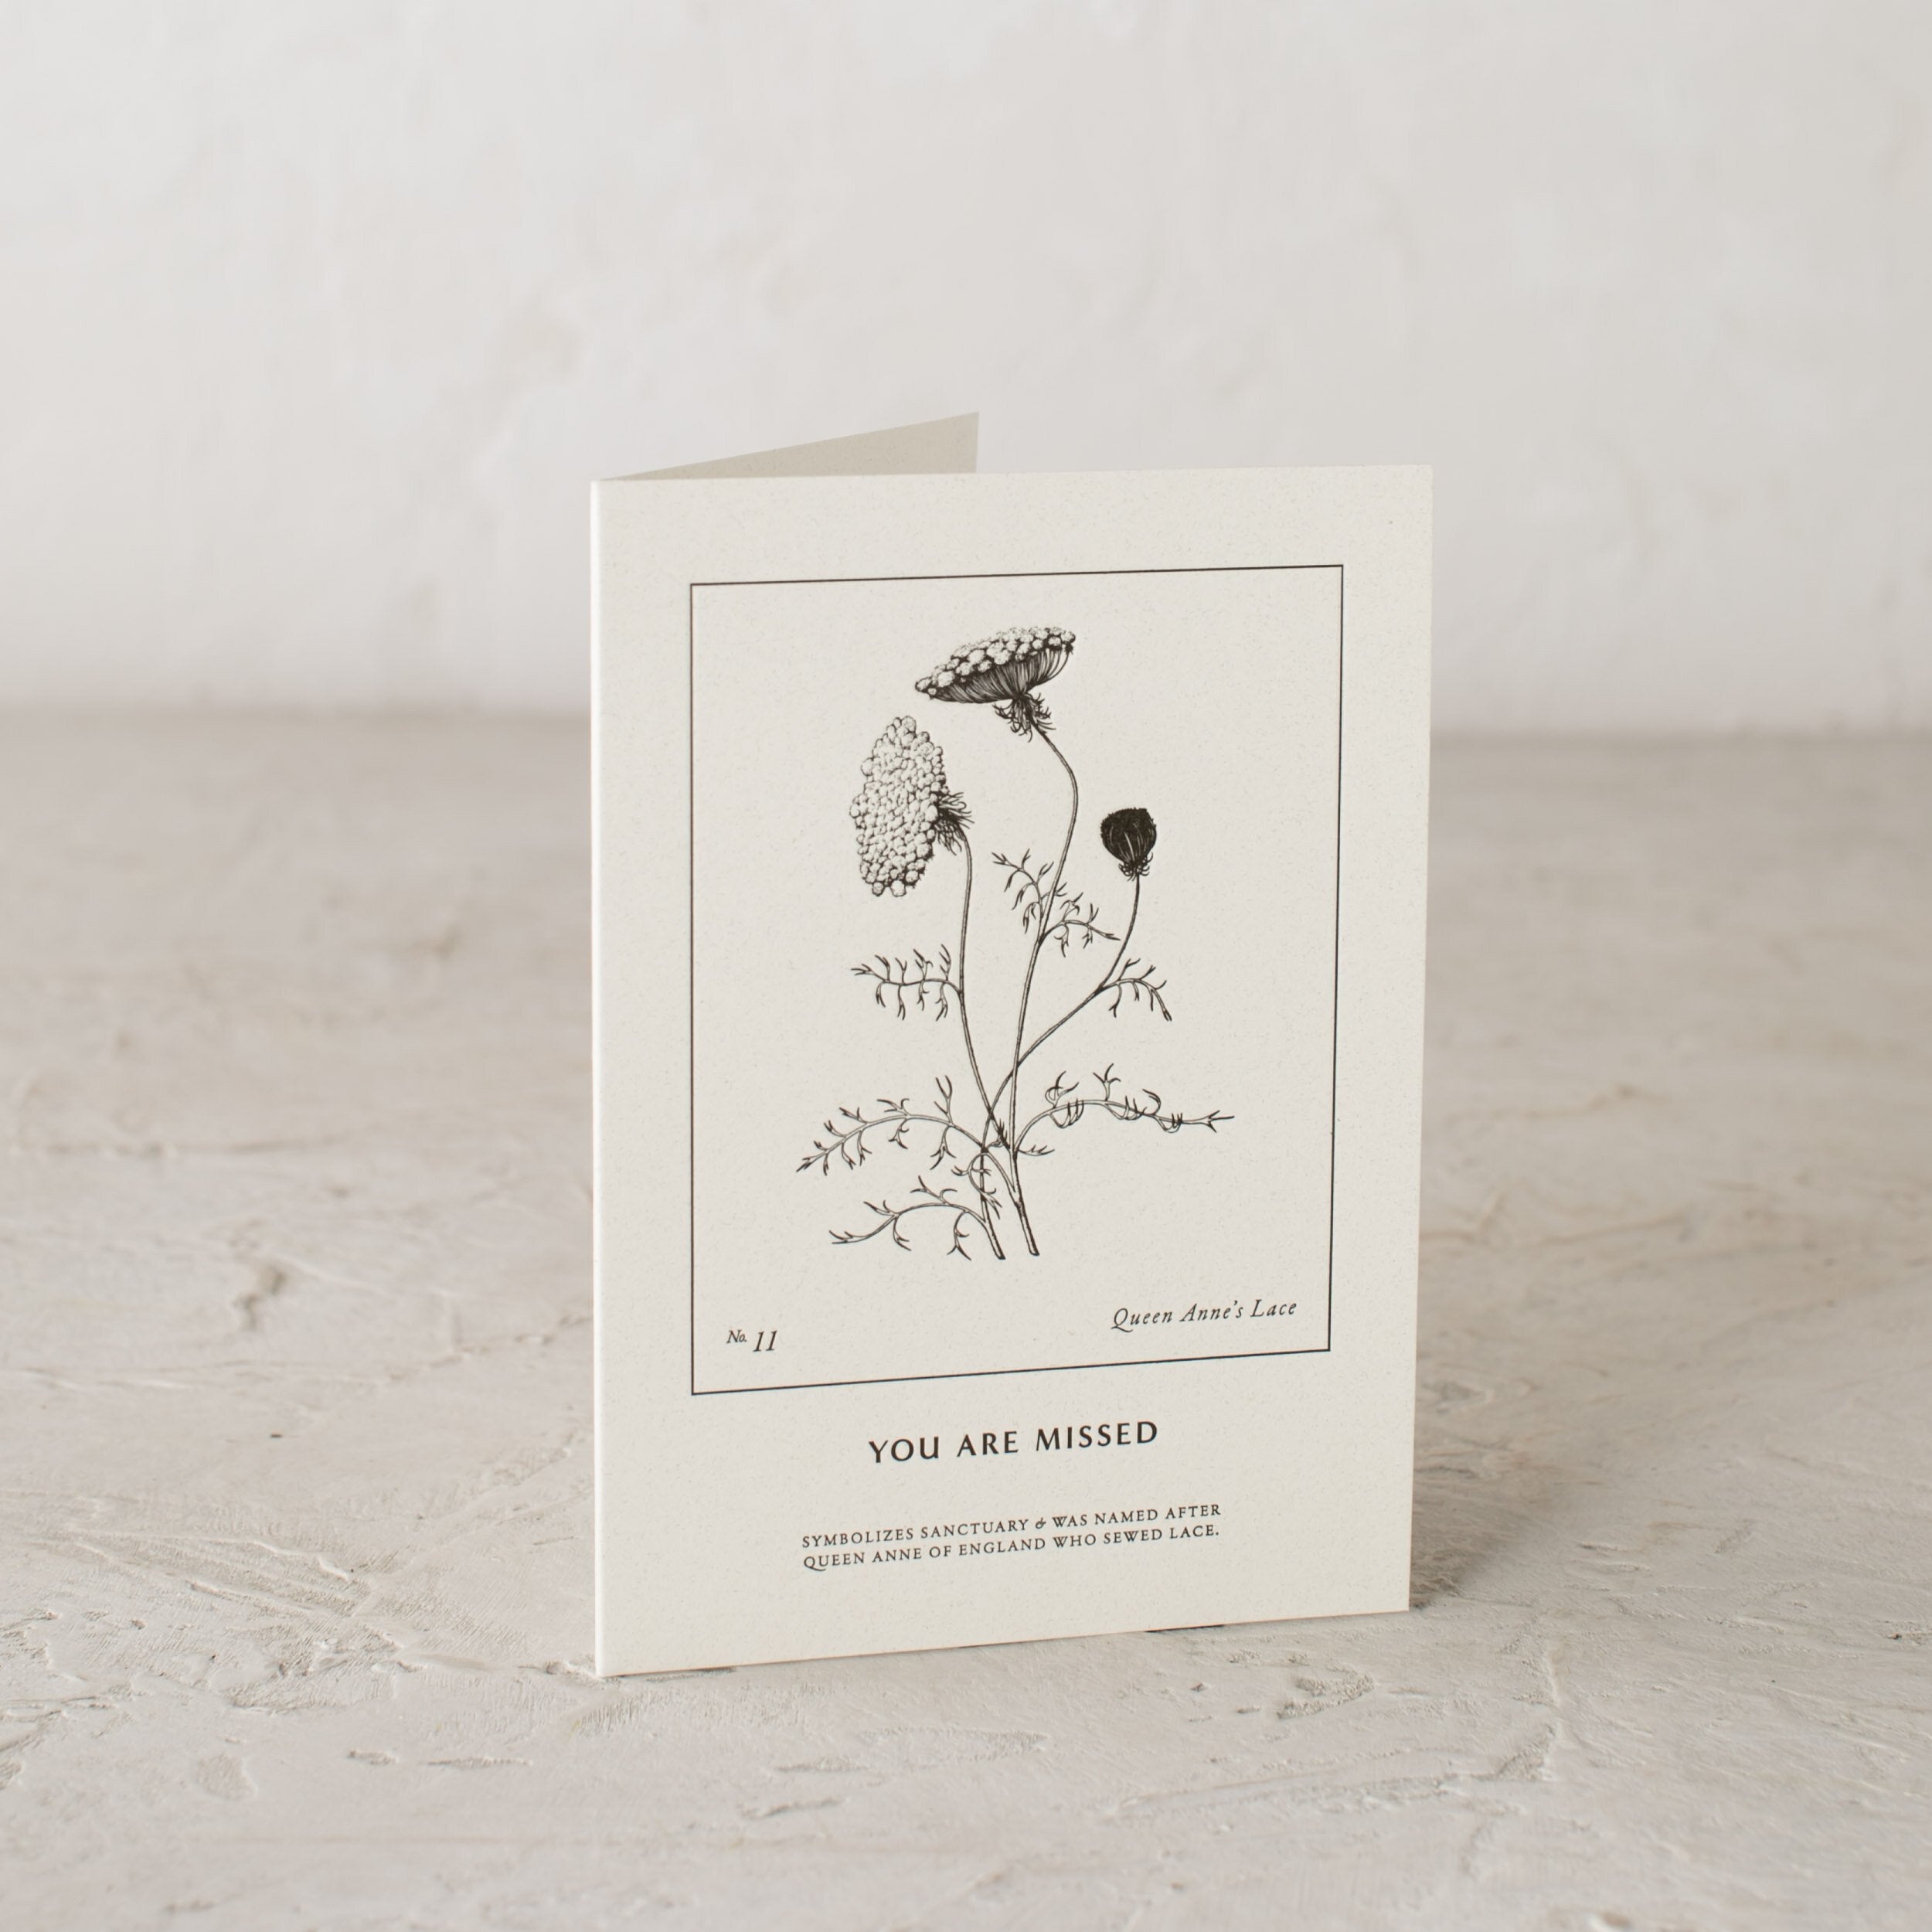 Letter pressed botanical cards - queen anne's lace botanical illustration - You Are Missed - Symbolizes sanctuary and was named after queen Anne of England who sewed lace. Letter pressed cards designed and sold by Shop Verdant, Kansas City gift store. 